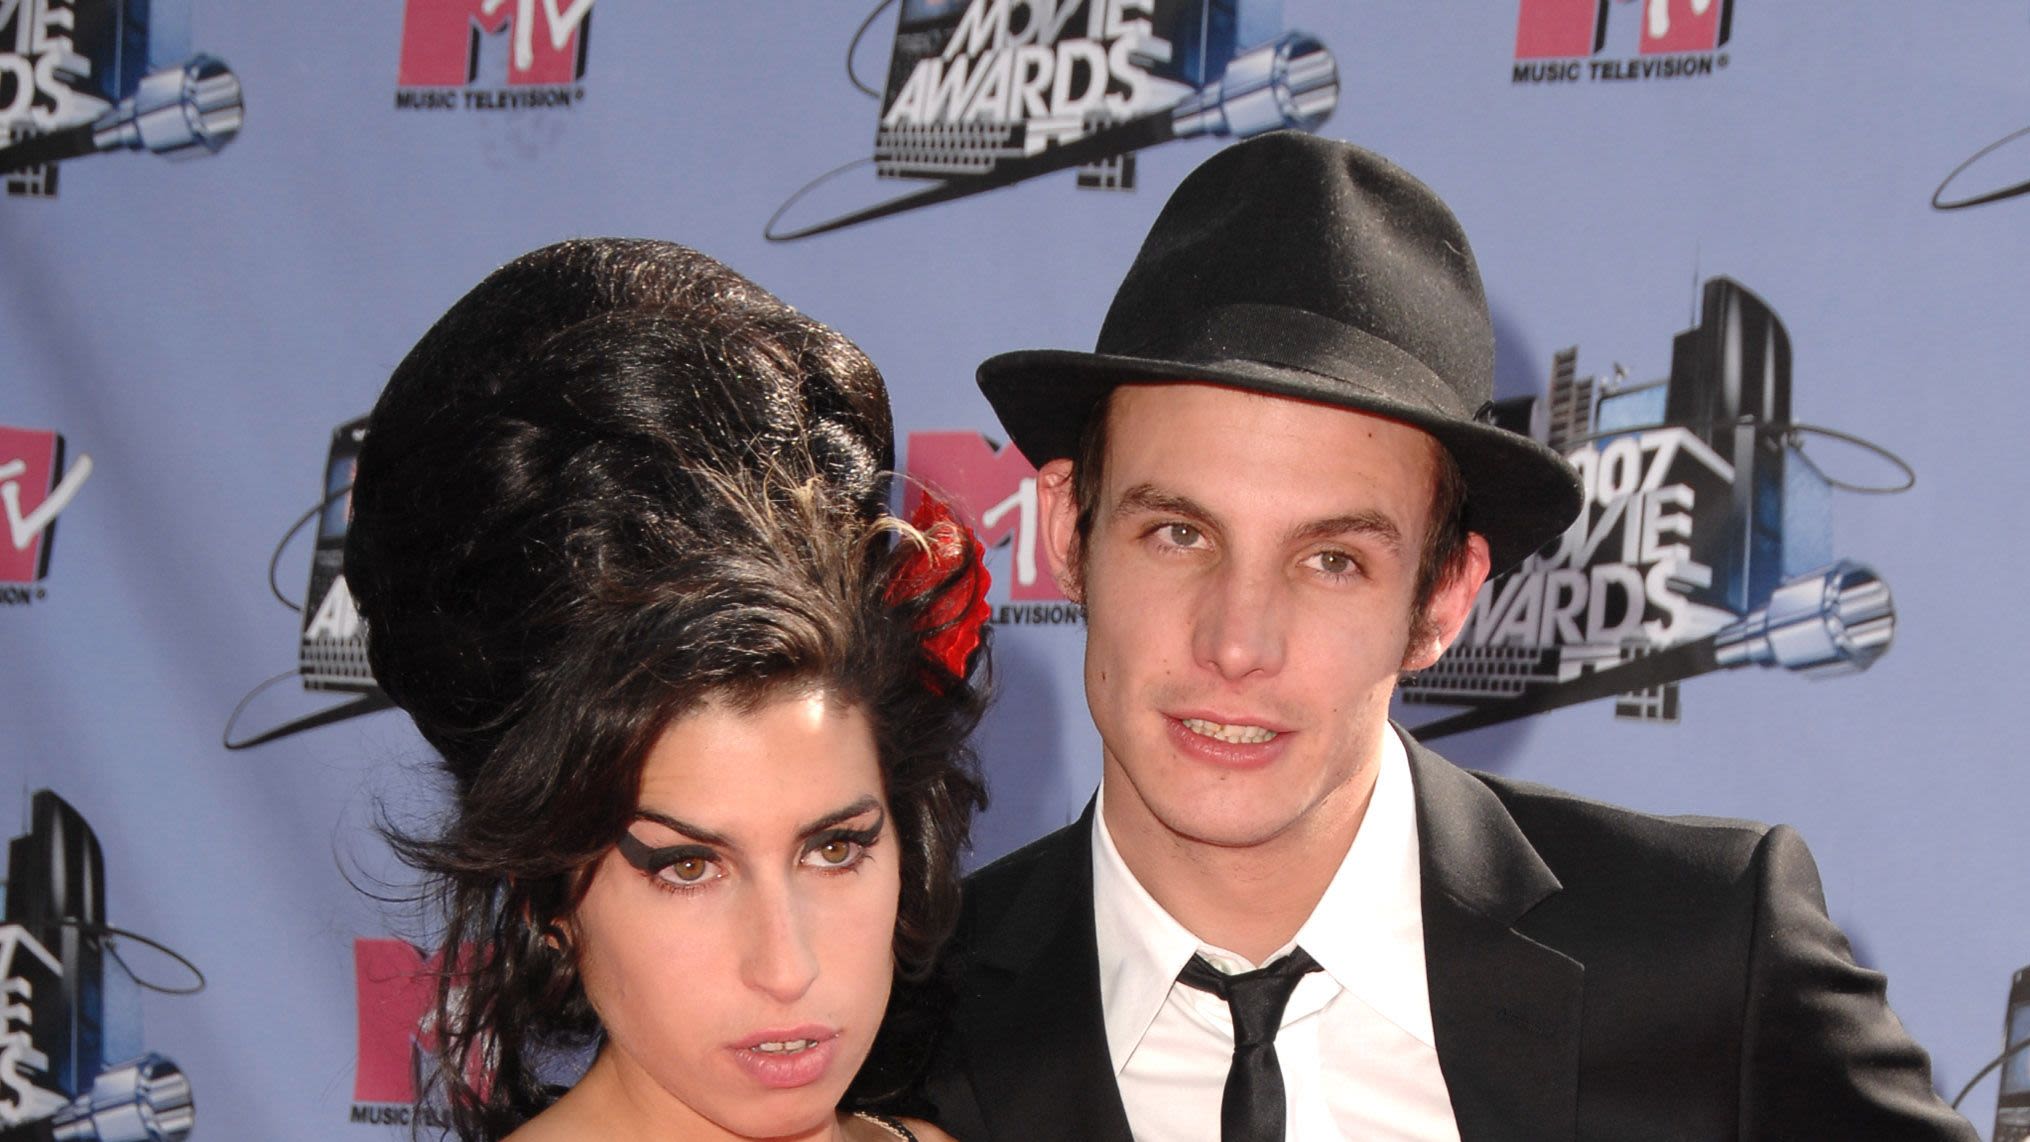 Amy Winehouse’s Ex-Husband Blake Fielder-Civil Says ﻿‘Back to Black﻿’ Is “Almost Therapeutic”